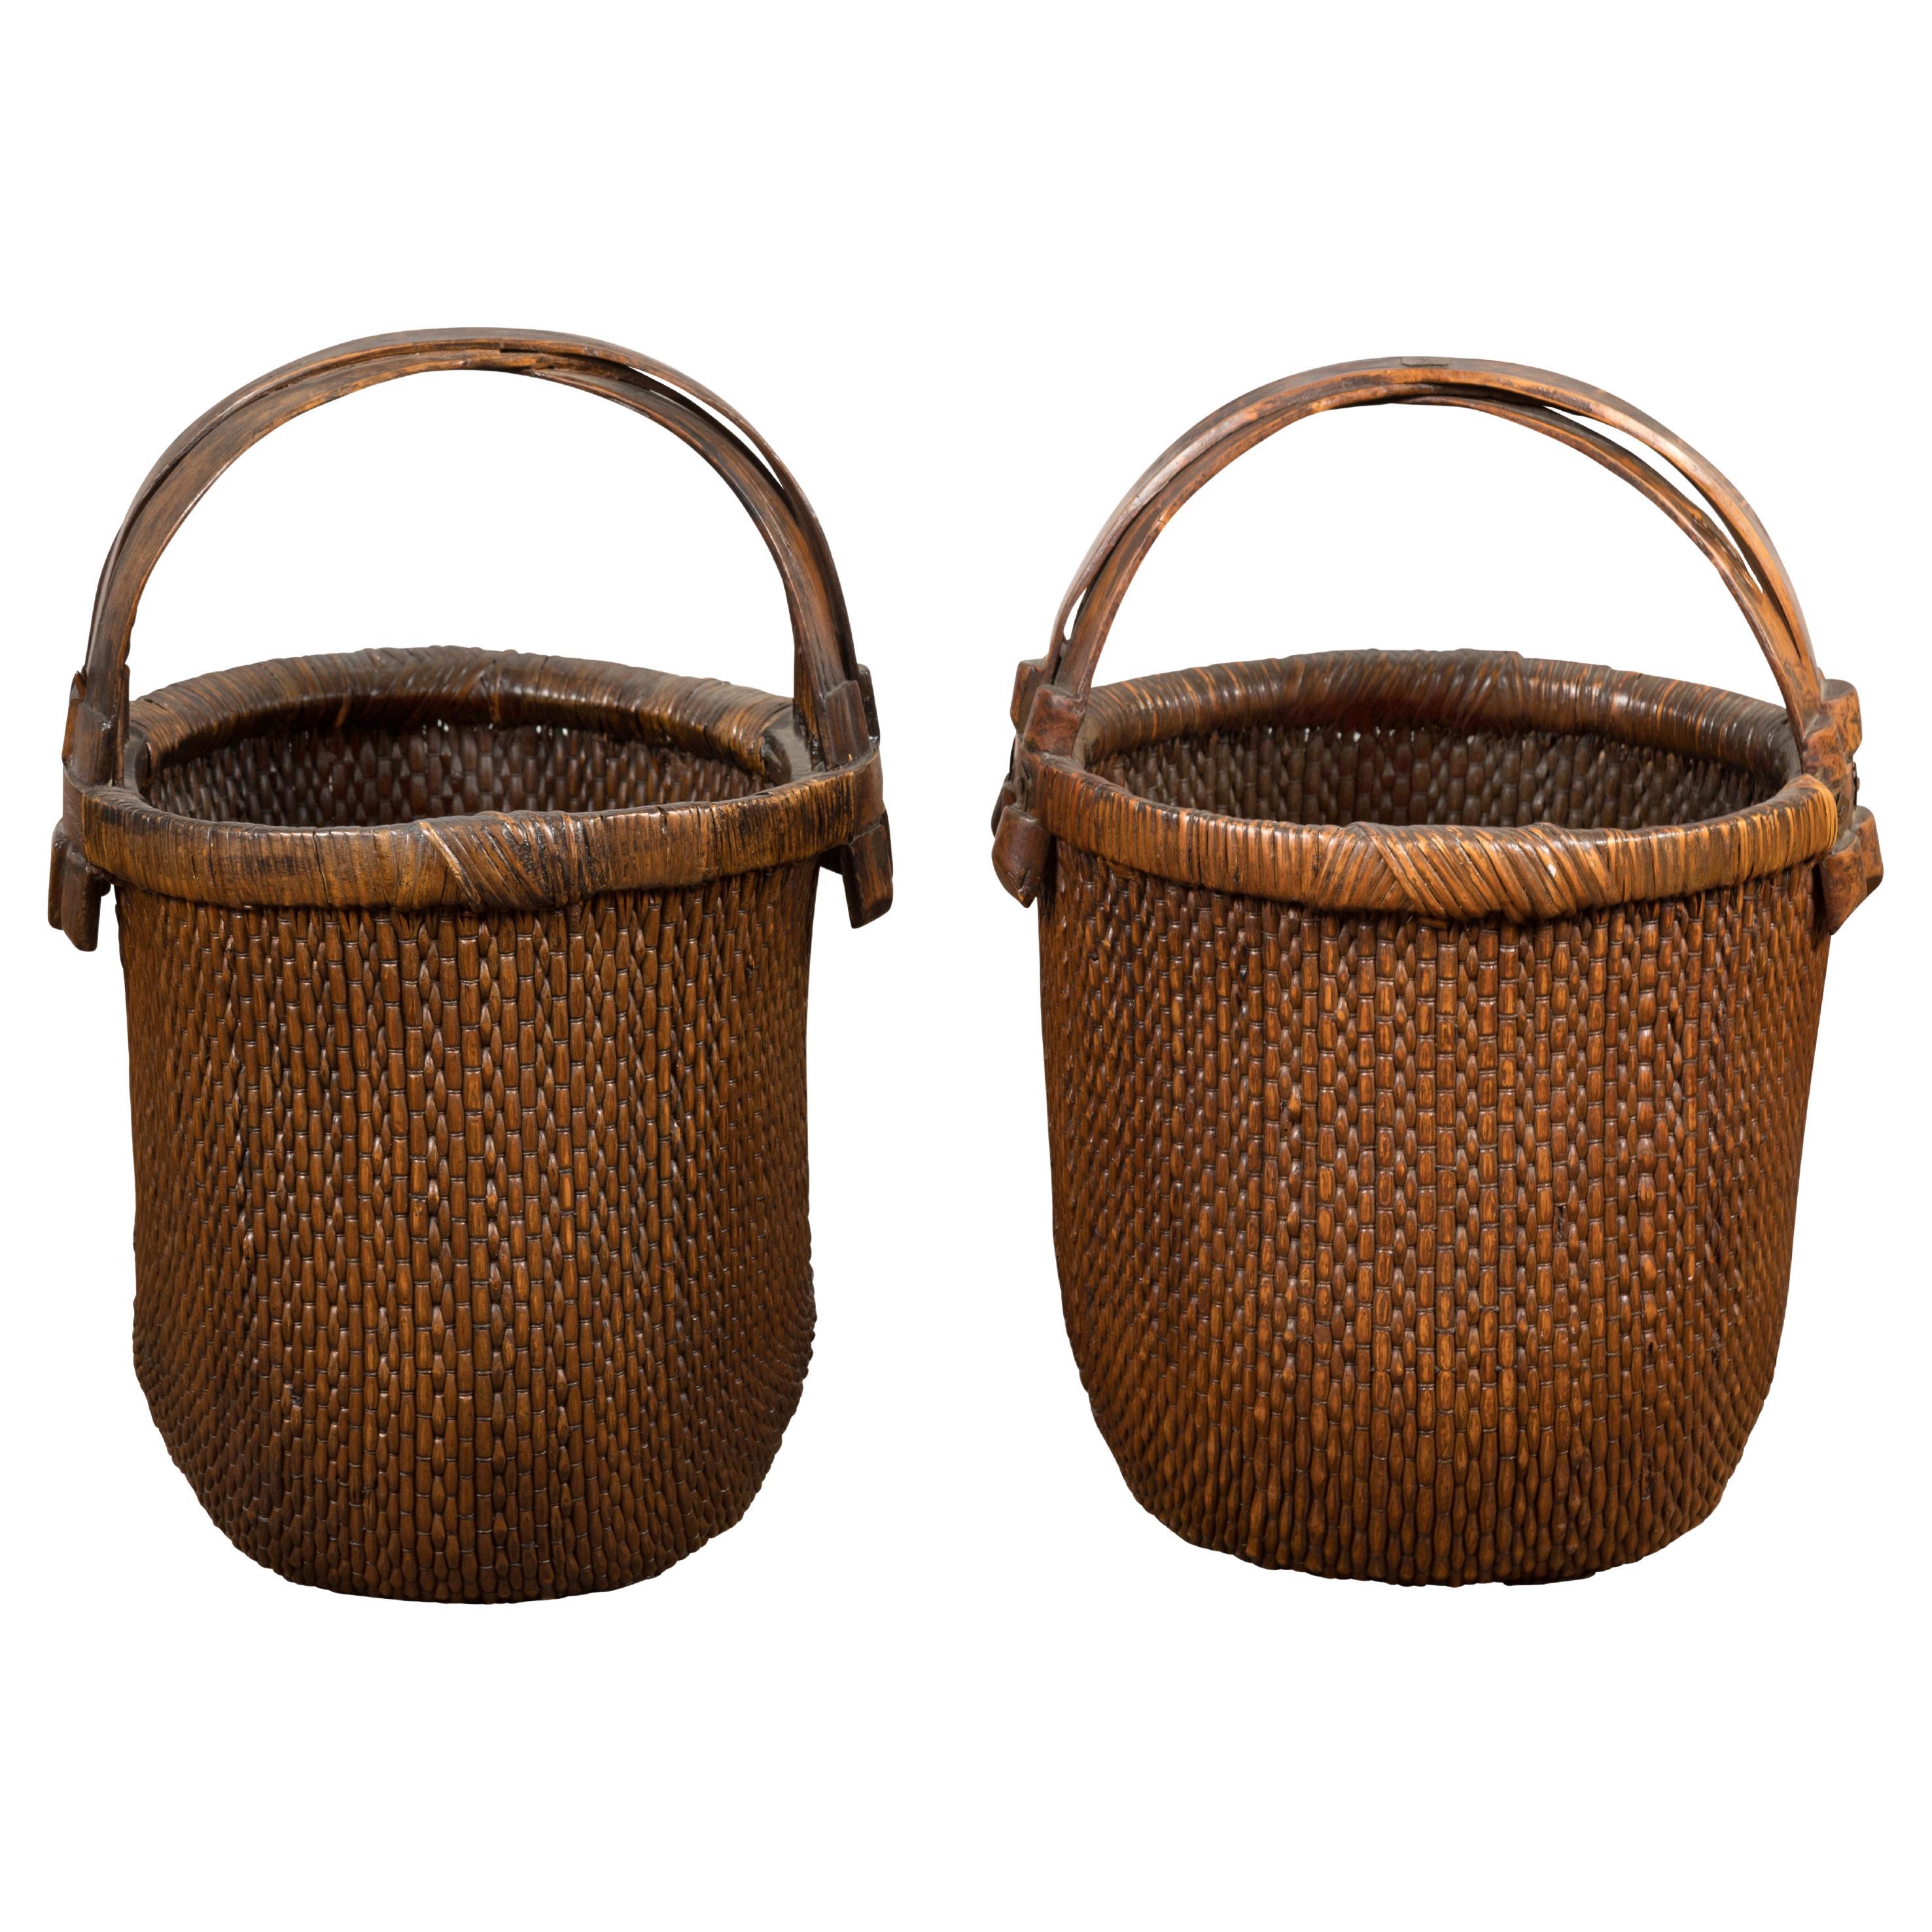 Chinese Antique Grain Baskets, Sold Each For Sale